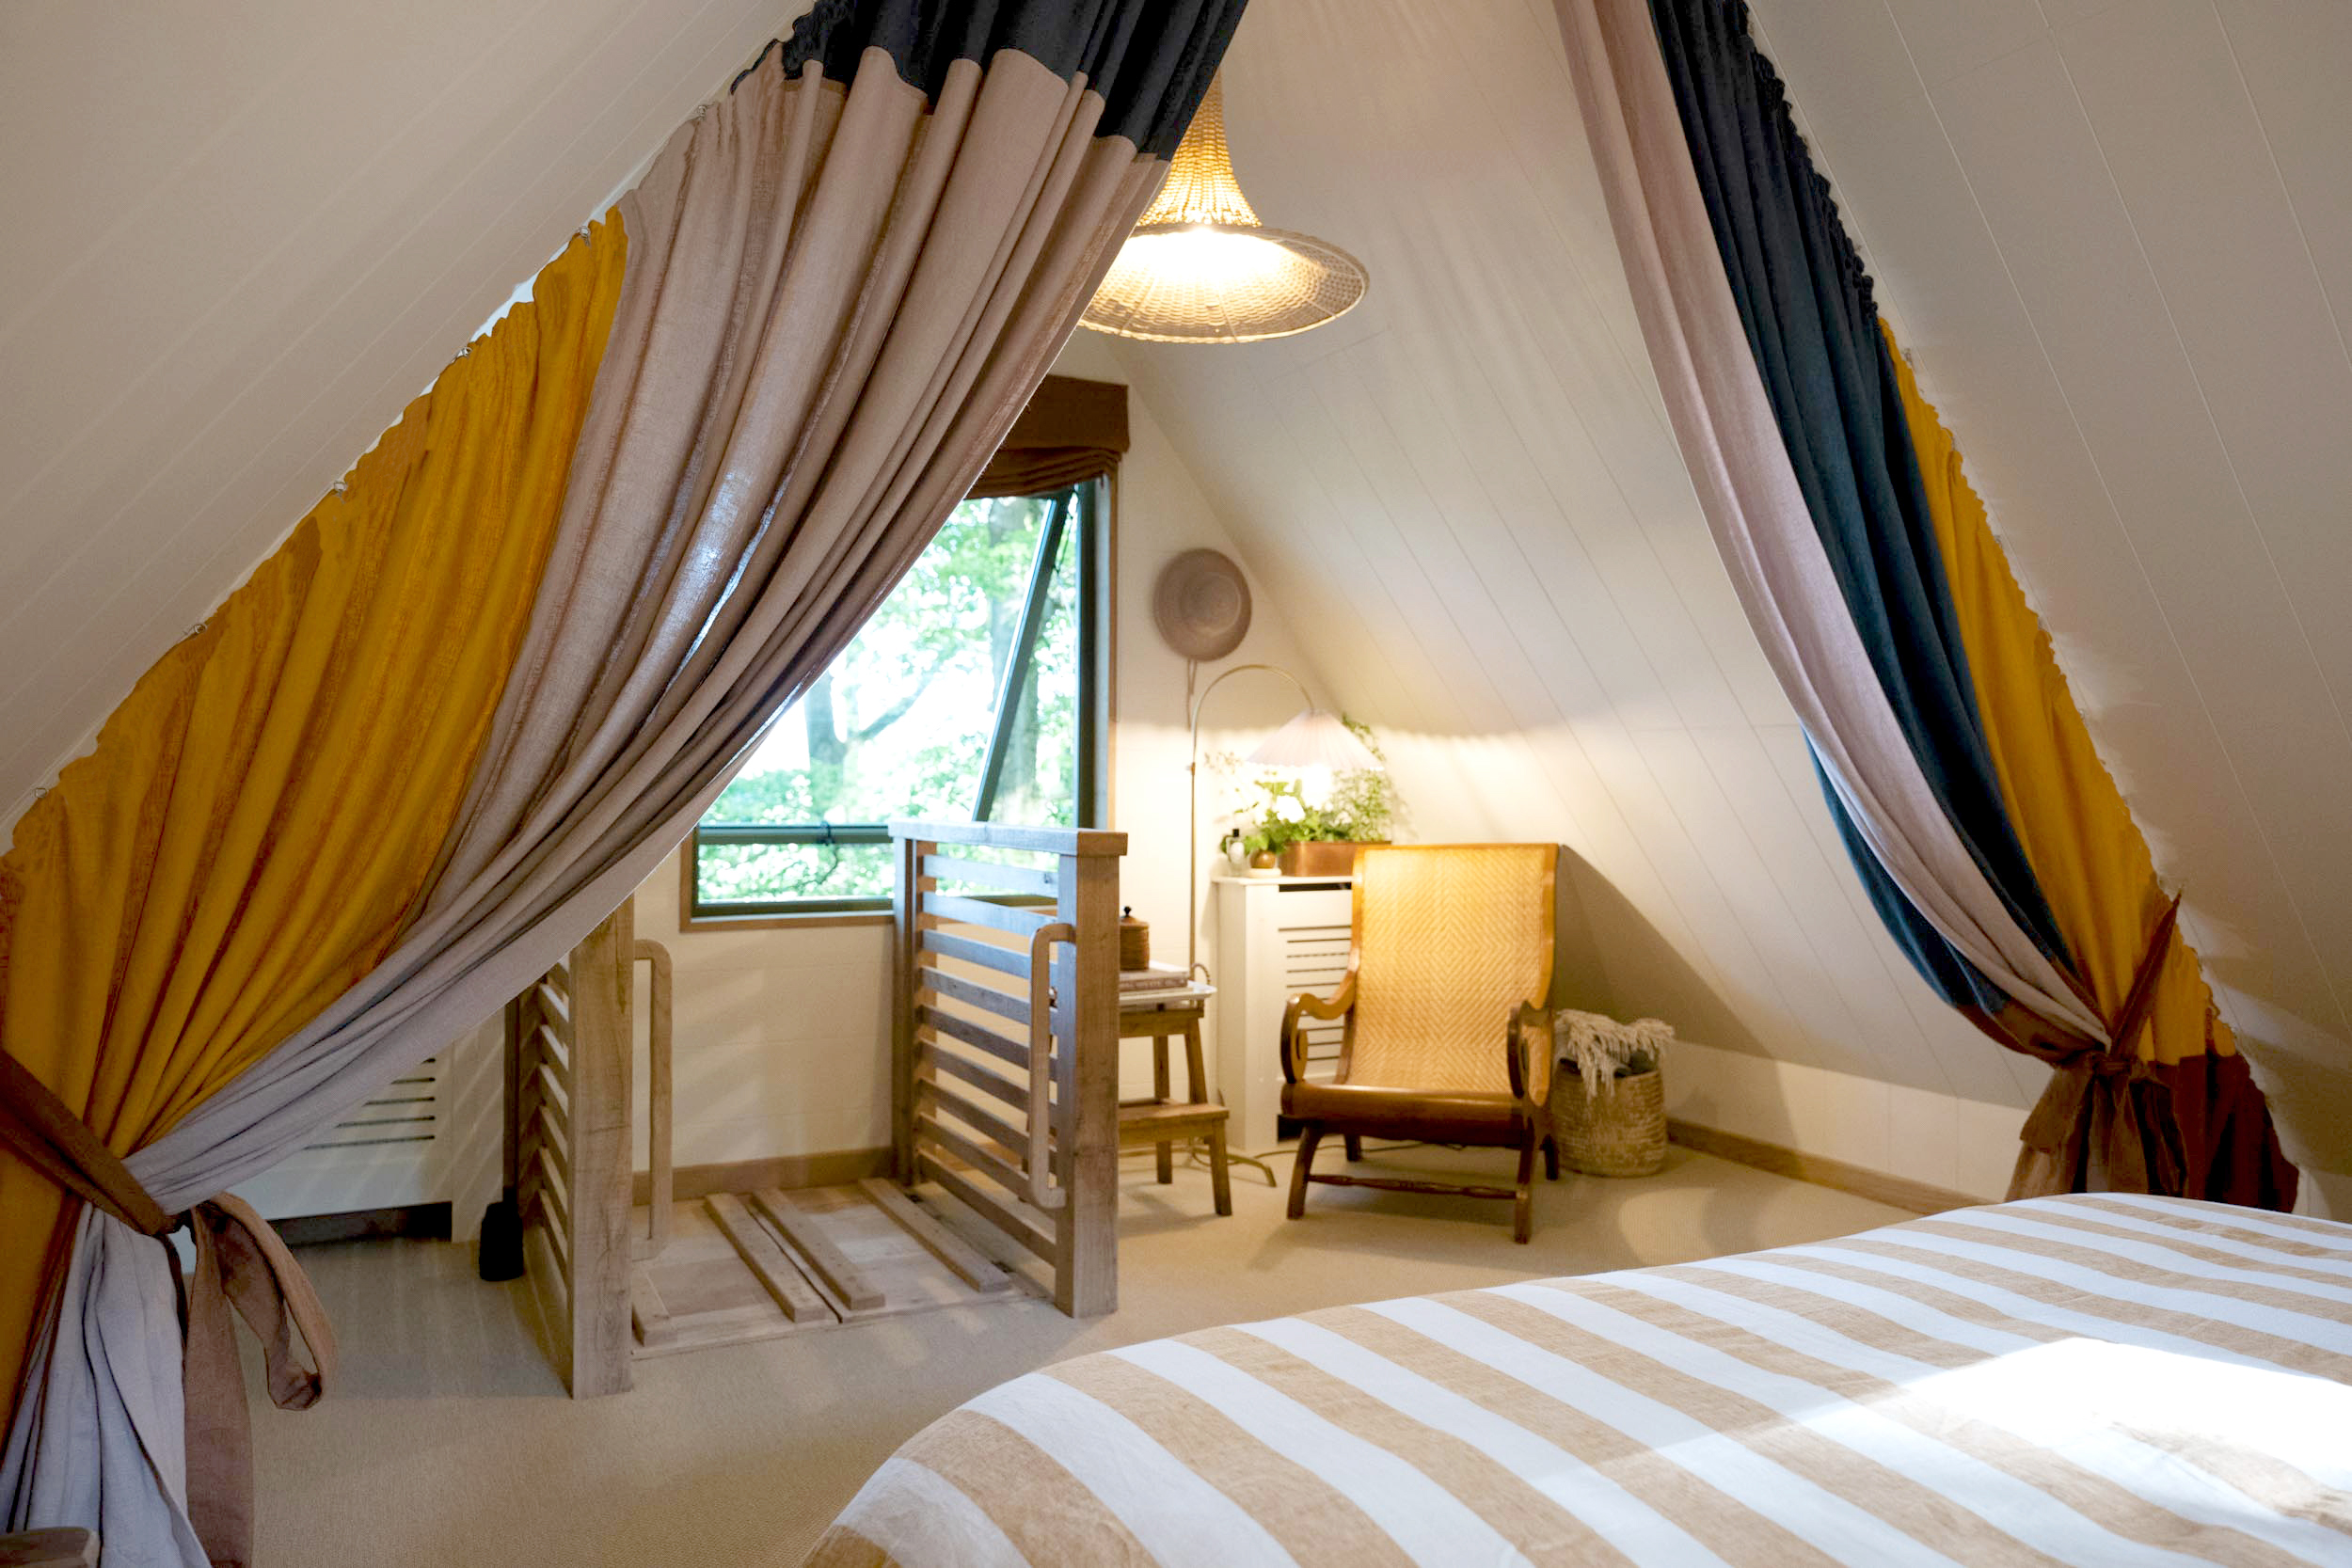 voluptuous custom curtains of house linen from the hackney draper create a tent 30